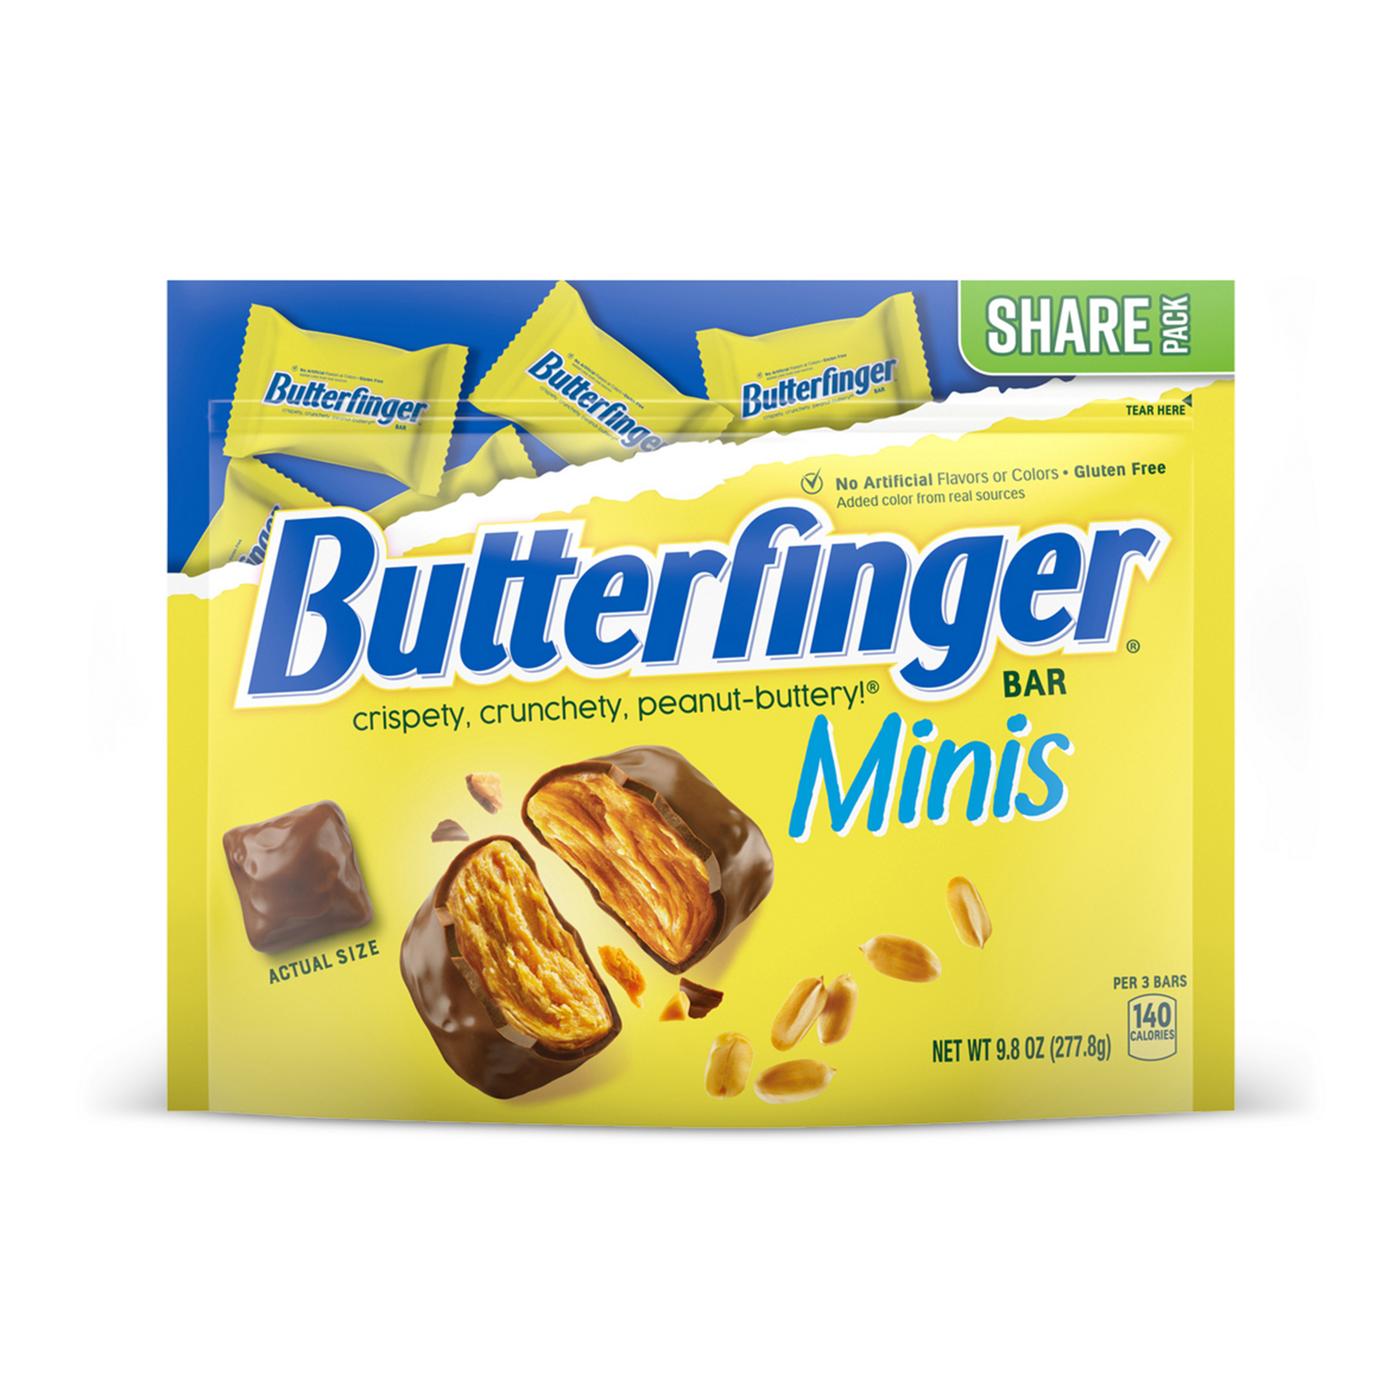 Butterfinger Minis Candy Bars - Share Pack; image 1 of 4